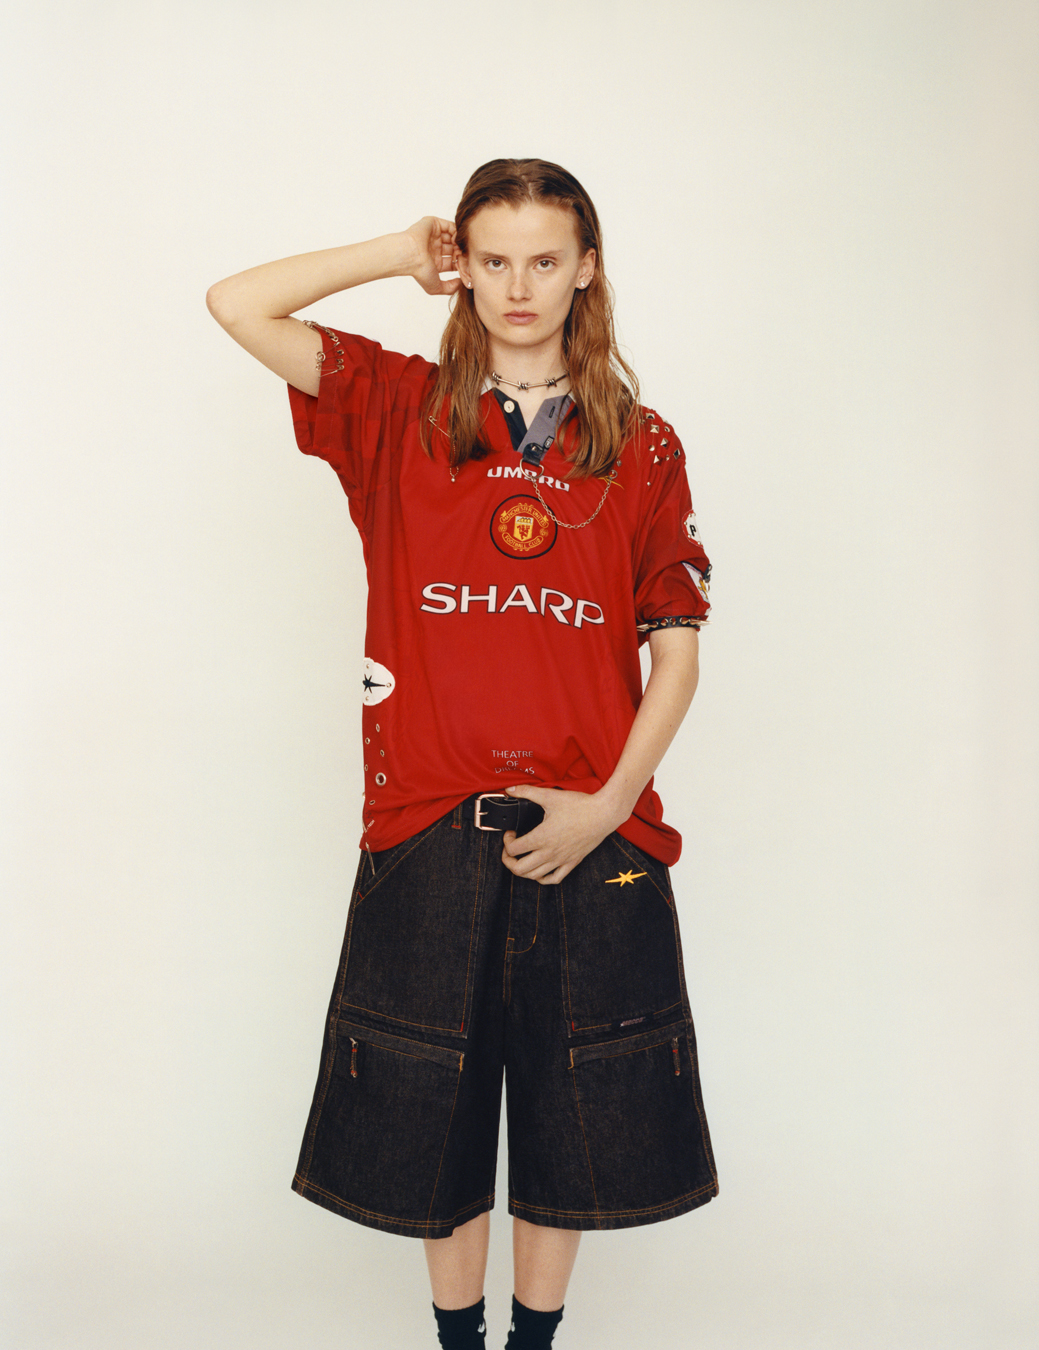 model in soccer jersey and shorts in iD 369 the Earthrise issue